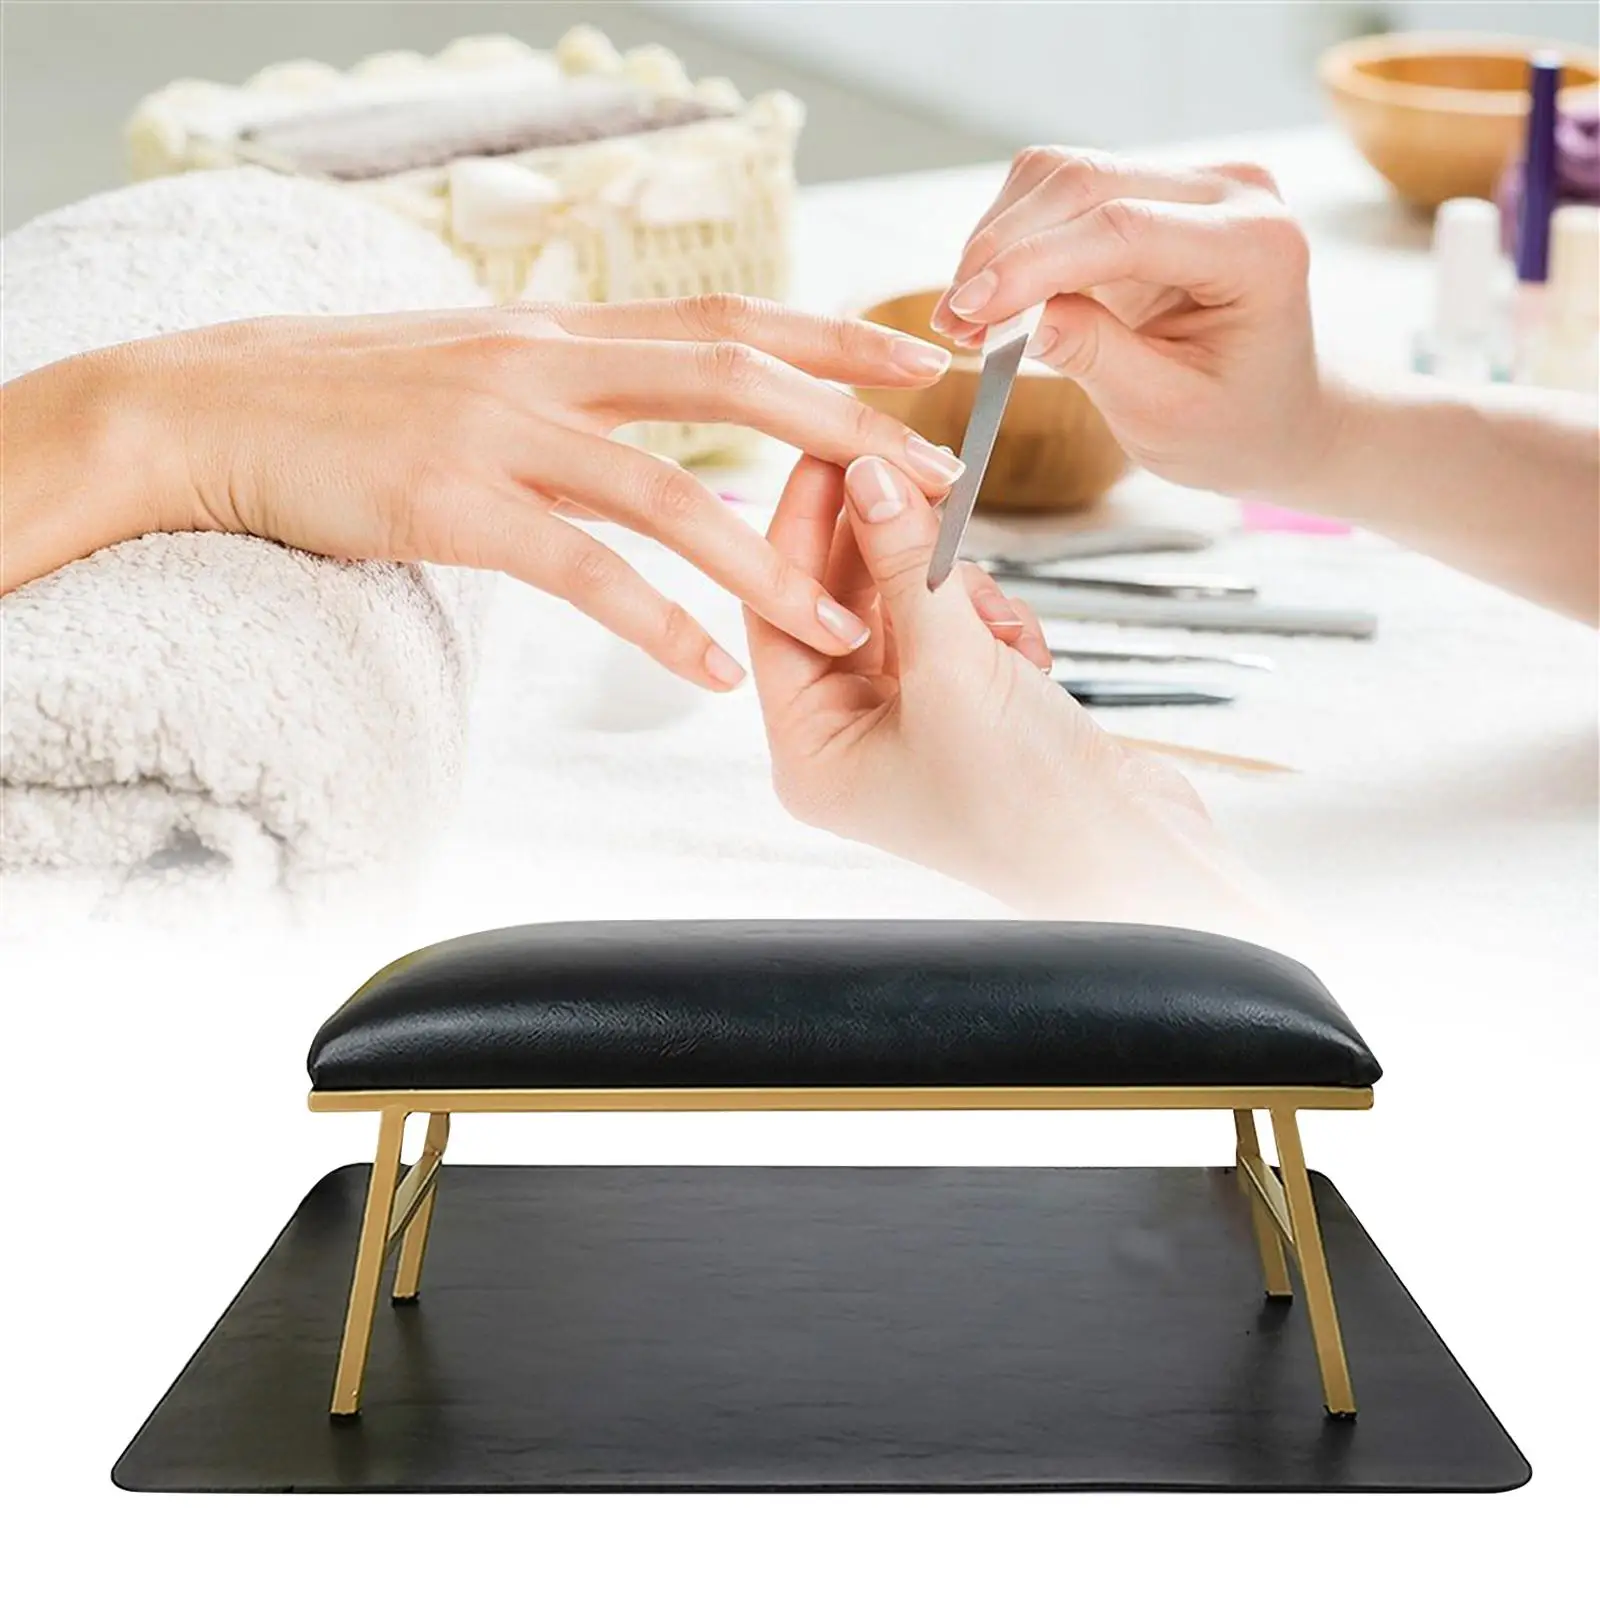 Nail Hand Pillow and Mat Set Accessory Manicure Tool Nail Arm Rest Holder Wrist Arm Pad for Manicurist Salon Nail Technician Use